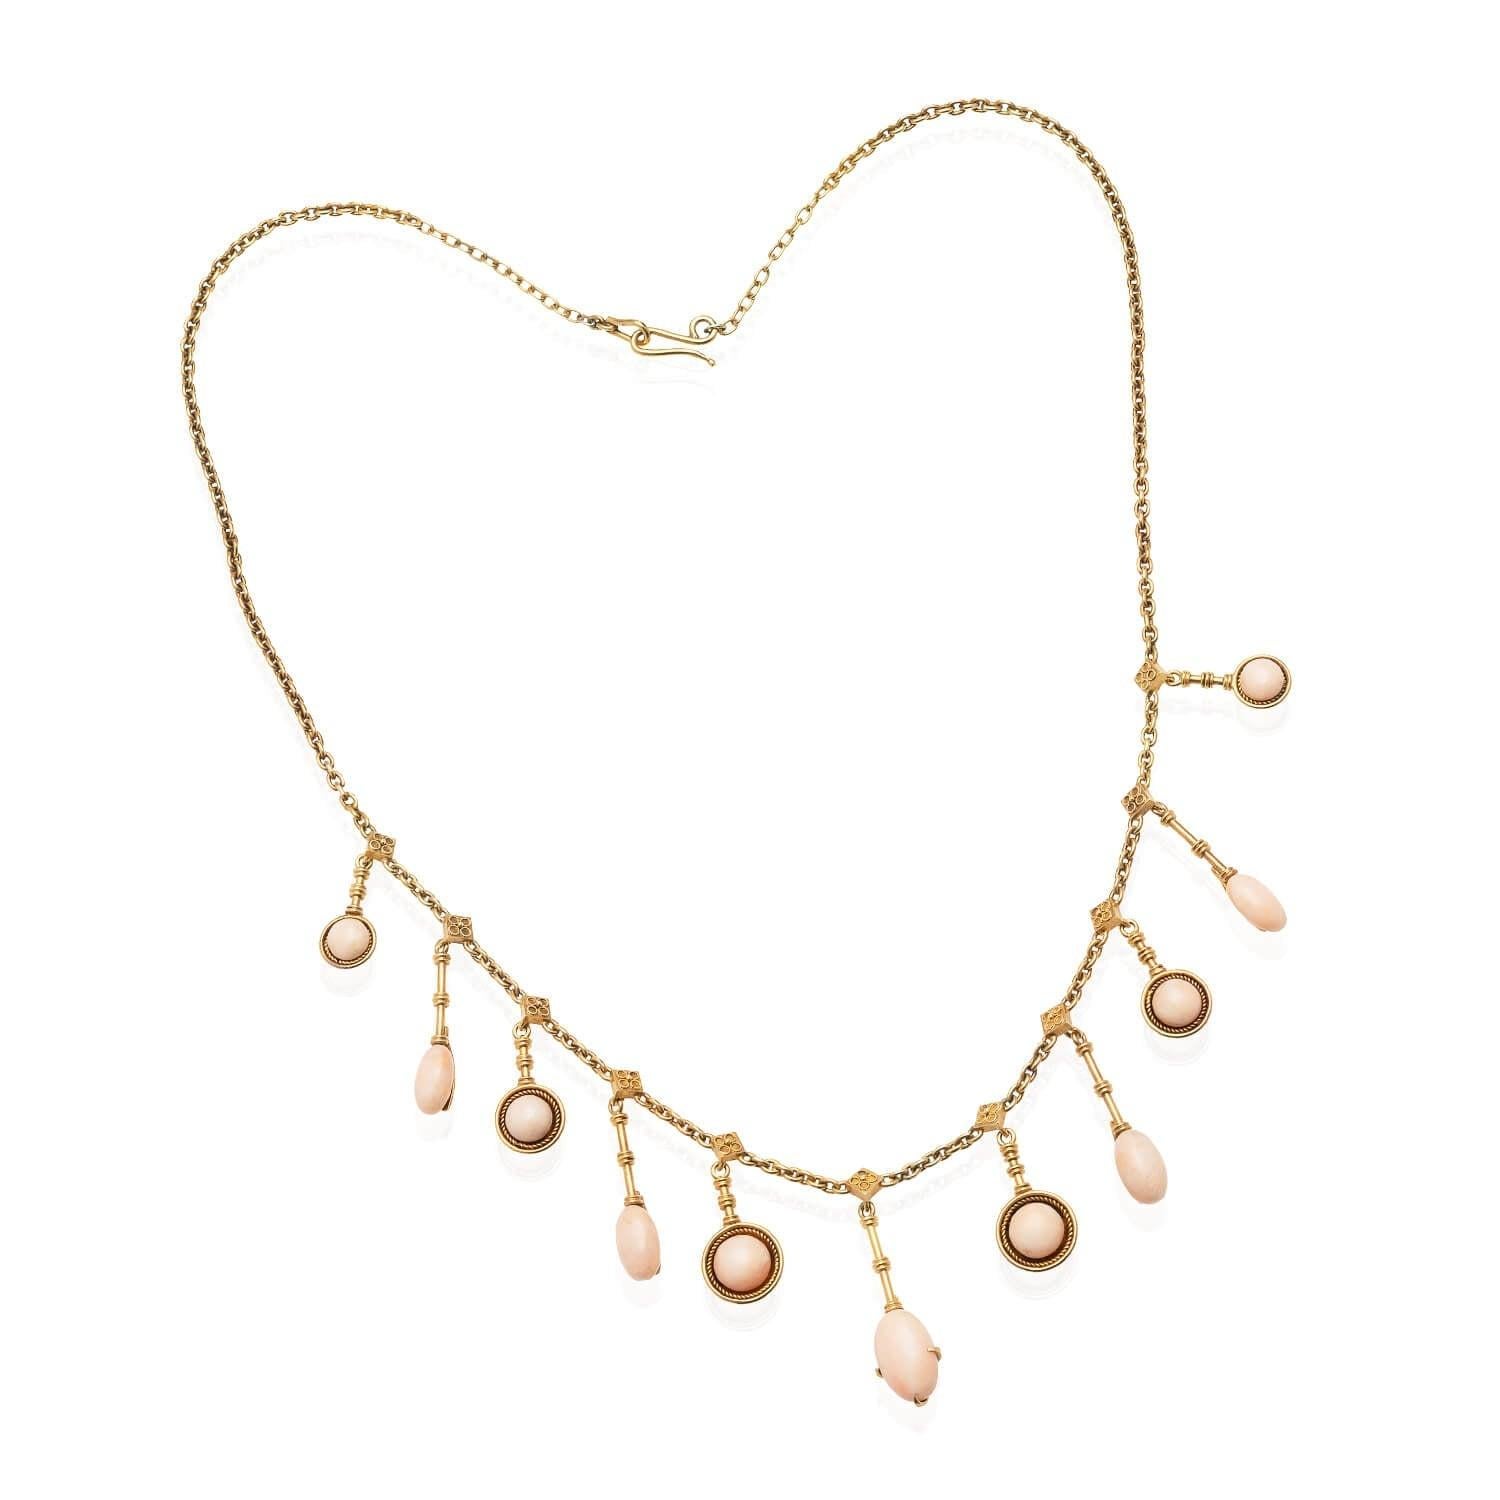 A lovely necklace from the Victorian (ca1880s) era! Crafted in 18kt yellow gold, this necklace features beautiful light pink Angel Skin coral. Hanging from detailed diamond-shaped settings, this festoon-style necklace alternates between round coral